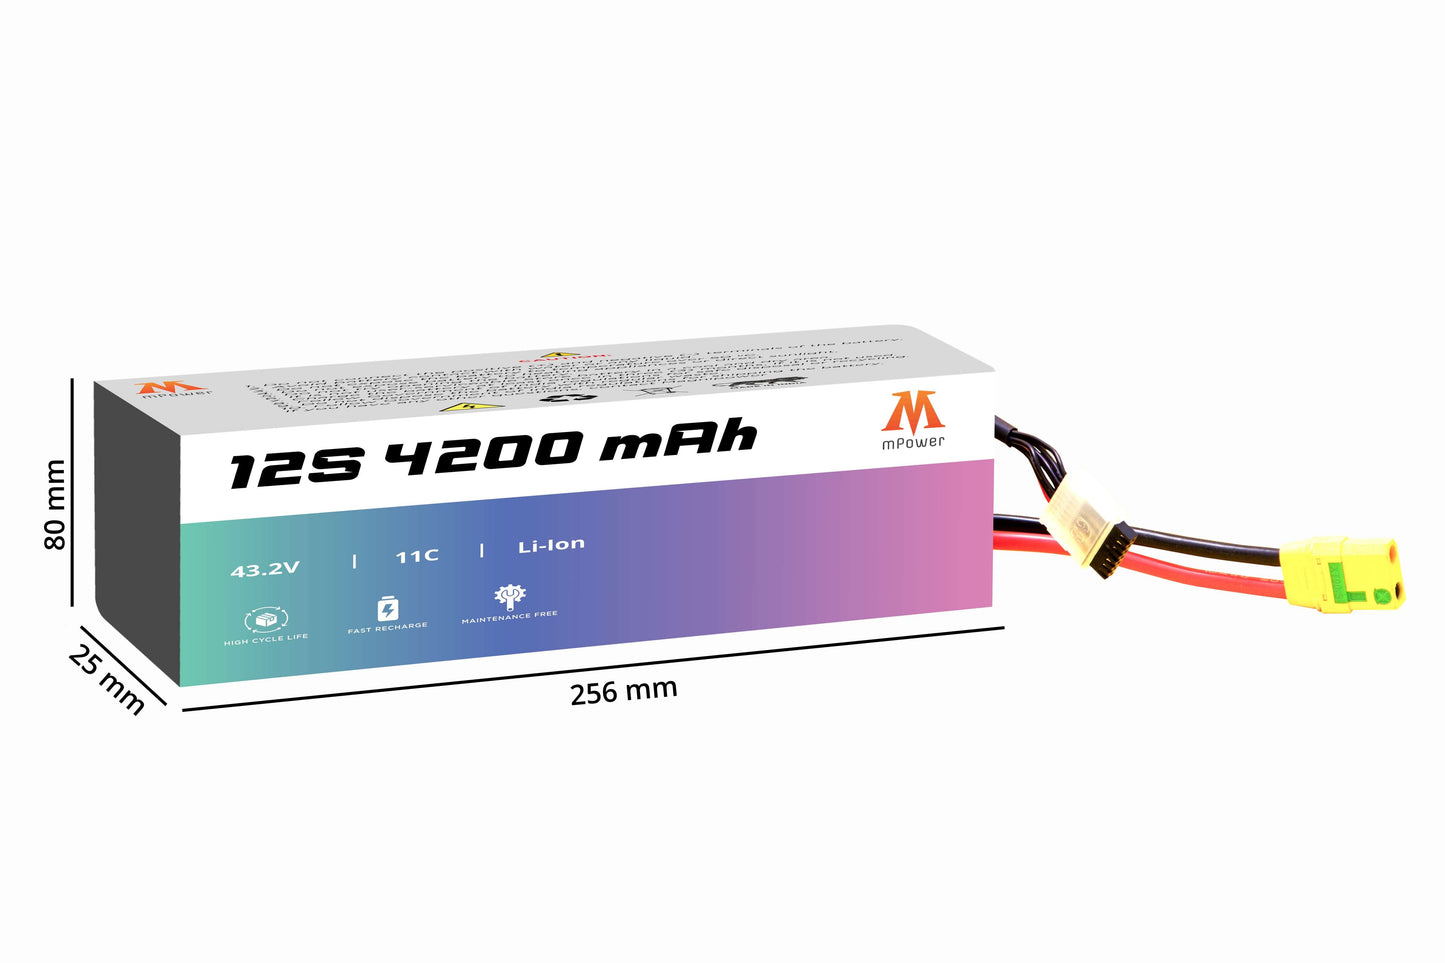 mPower 12S 4200mAh Lithium-Ion Battery for Survey Drones